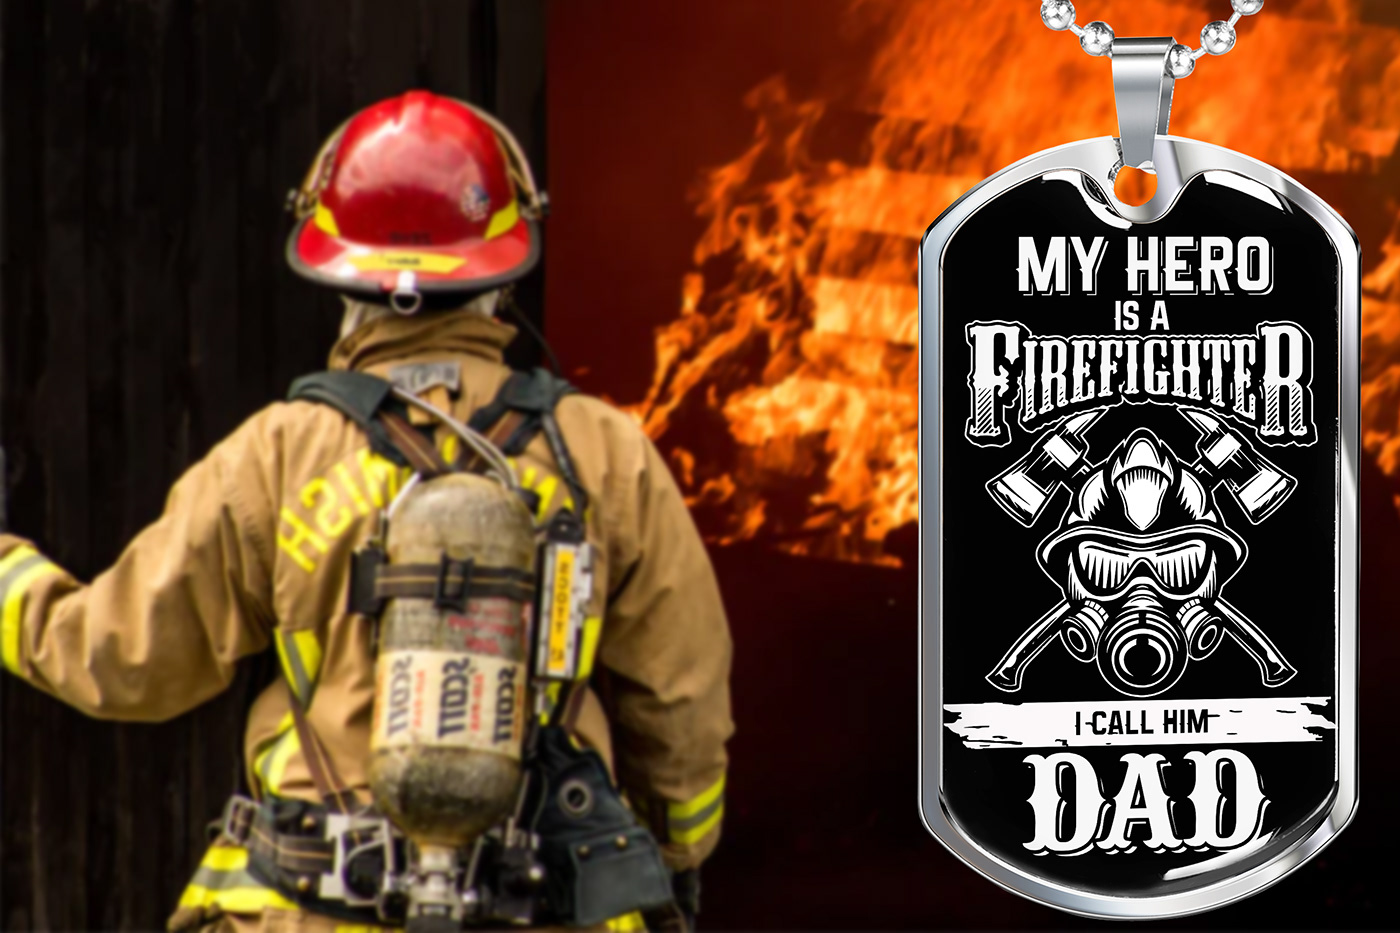 daughter to dad dog tag design fathers day quotes Firefighter free mockup  gearbubble message card Necklace pedant design SHINEON  